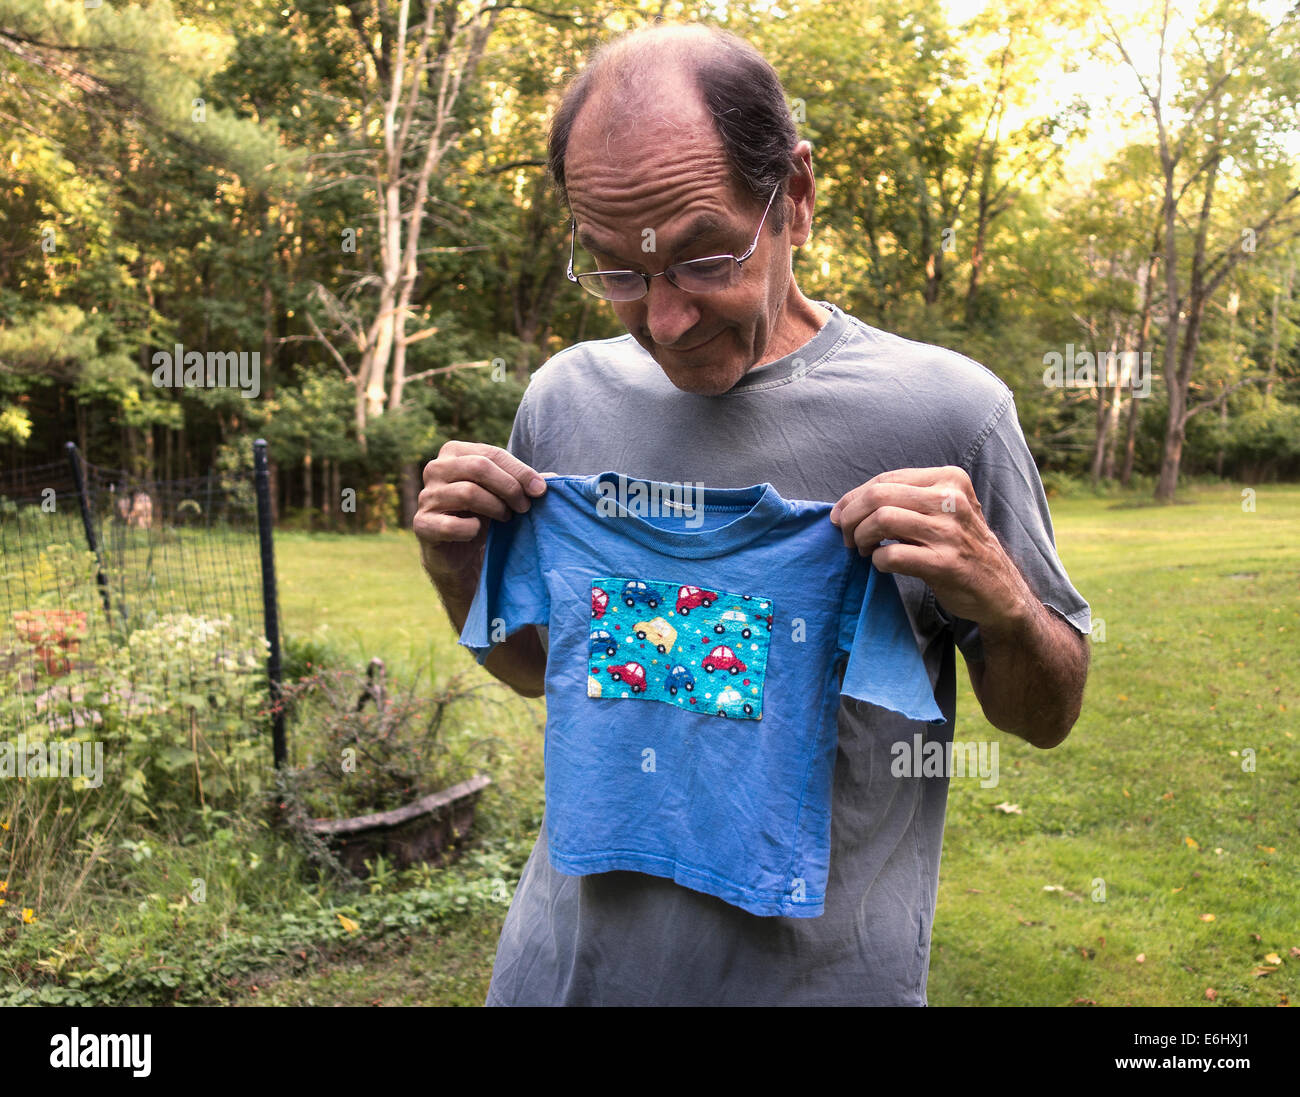 senior man on lawn with child's t-shirt Stock Photo